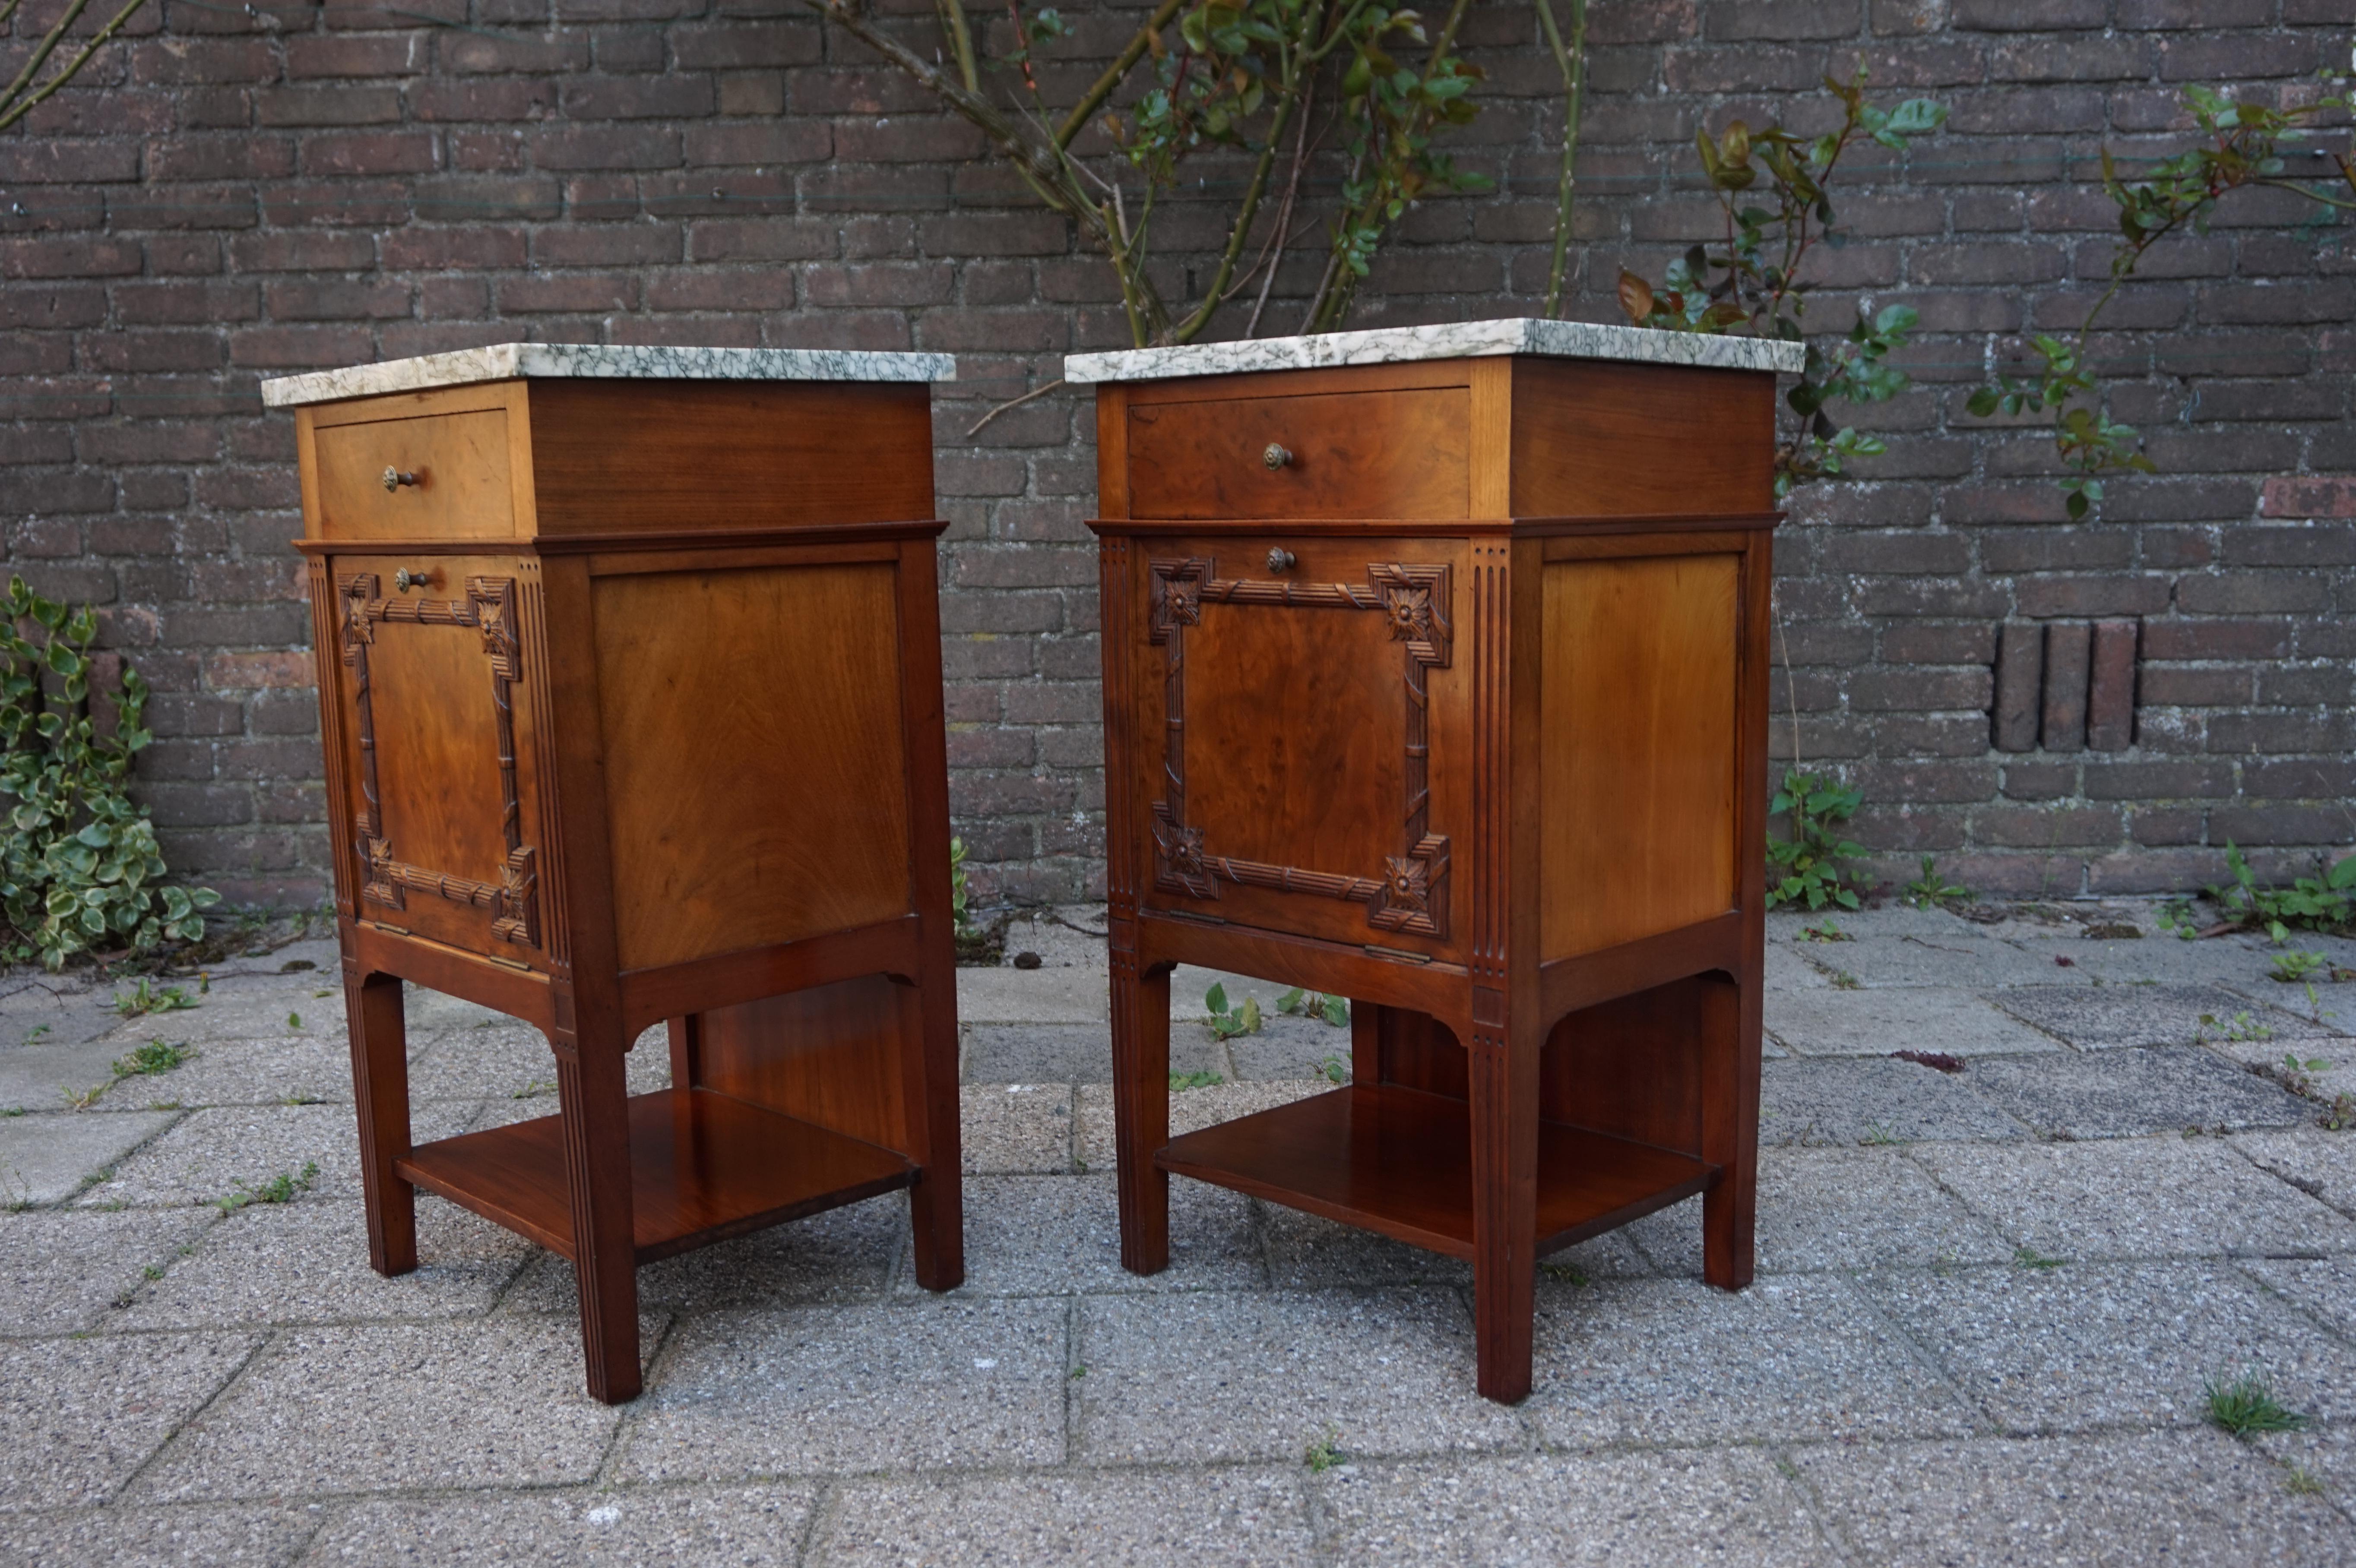 20th Century Antique Mahogany Bedside Cabinets w. Hand Carved Elements and Green Marble Tops